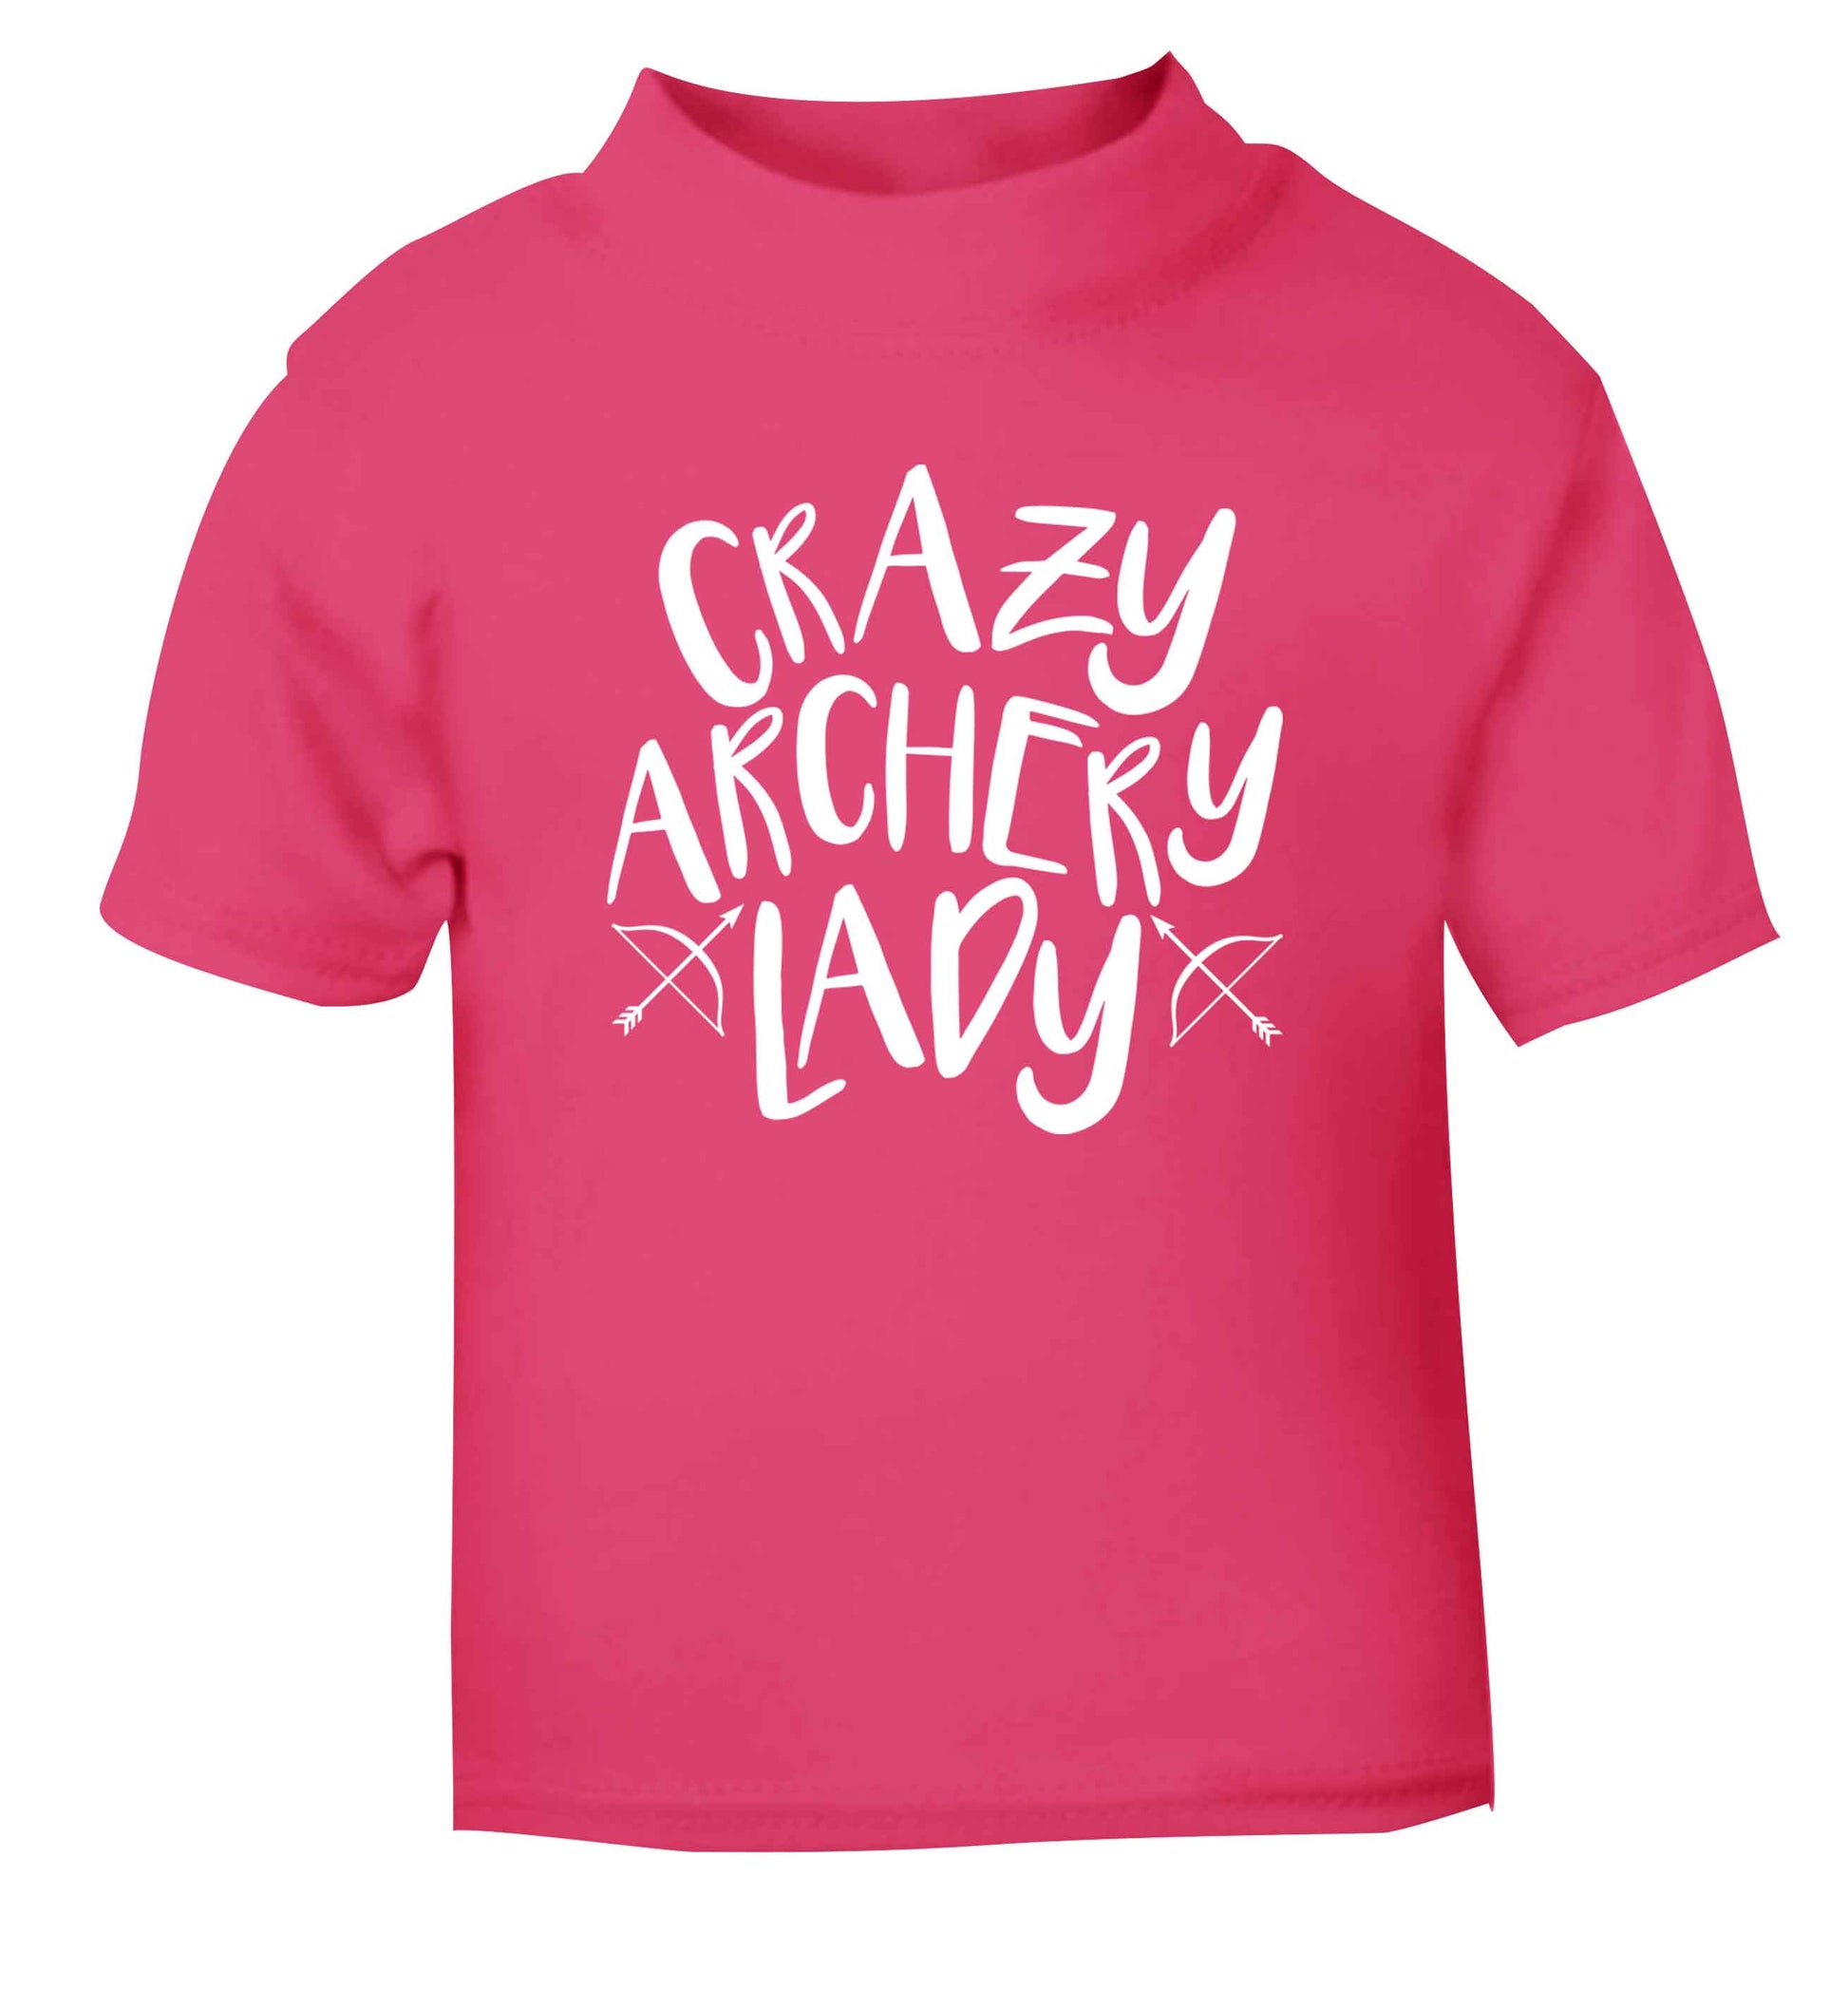 Crazy archery lady pink Baby Toddler Tshirt 2 Years